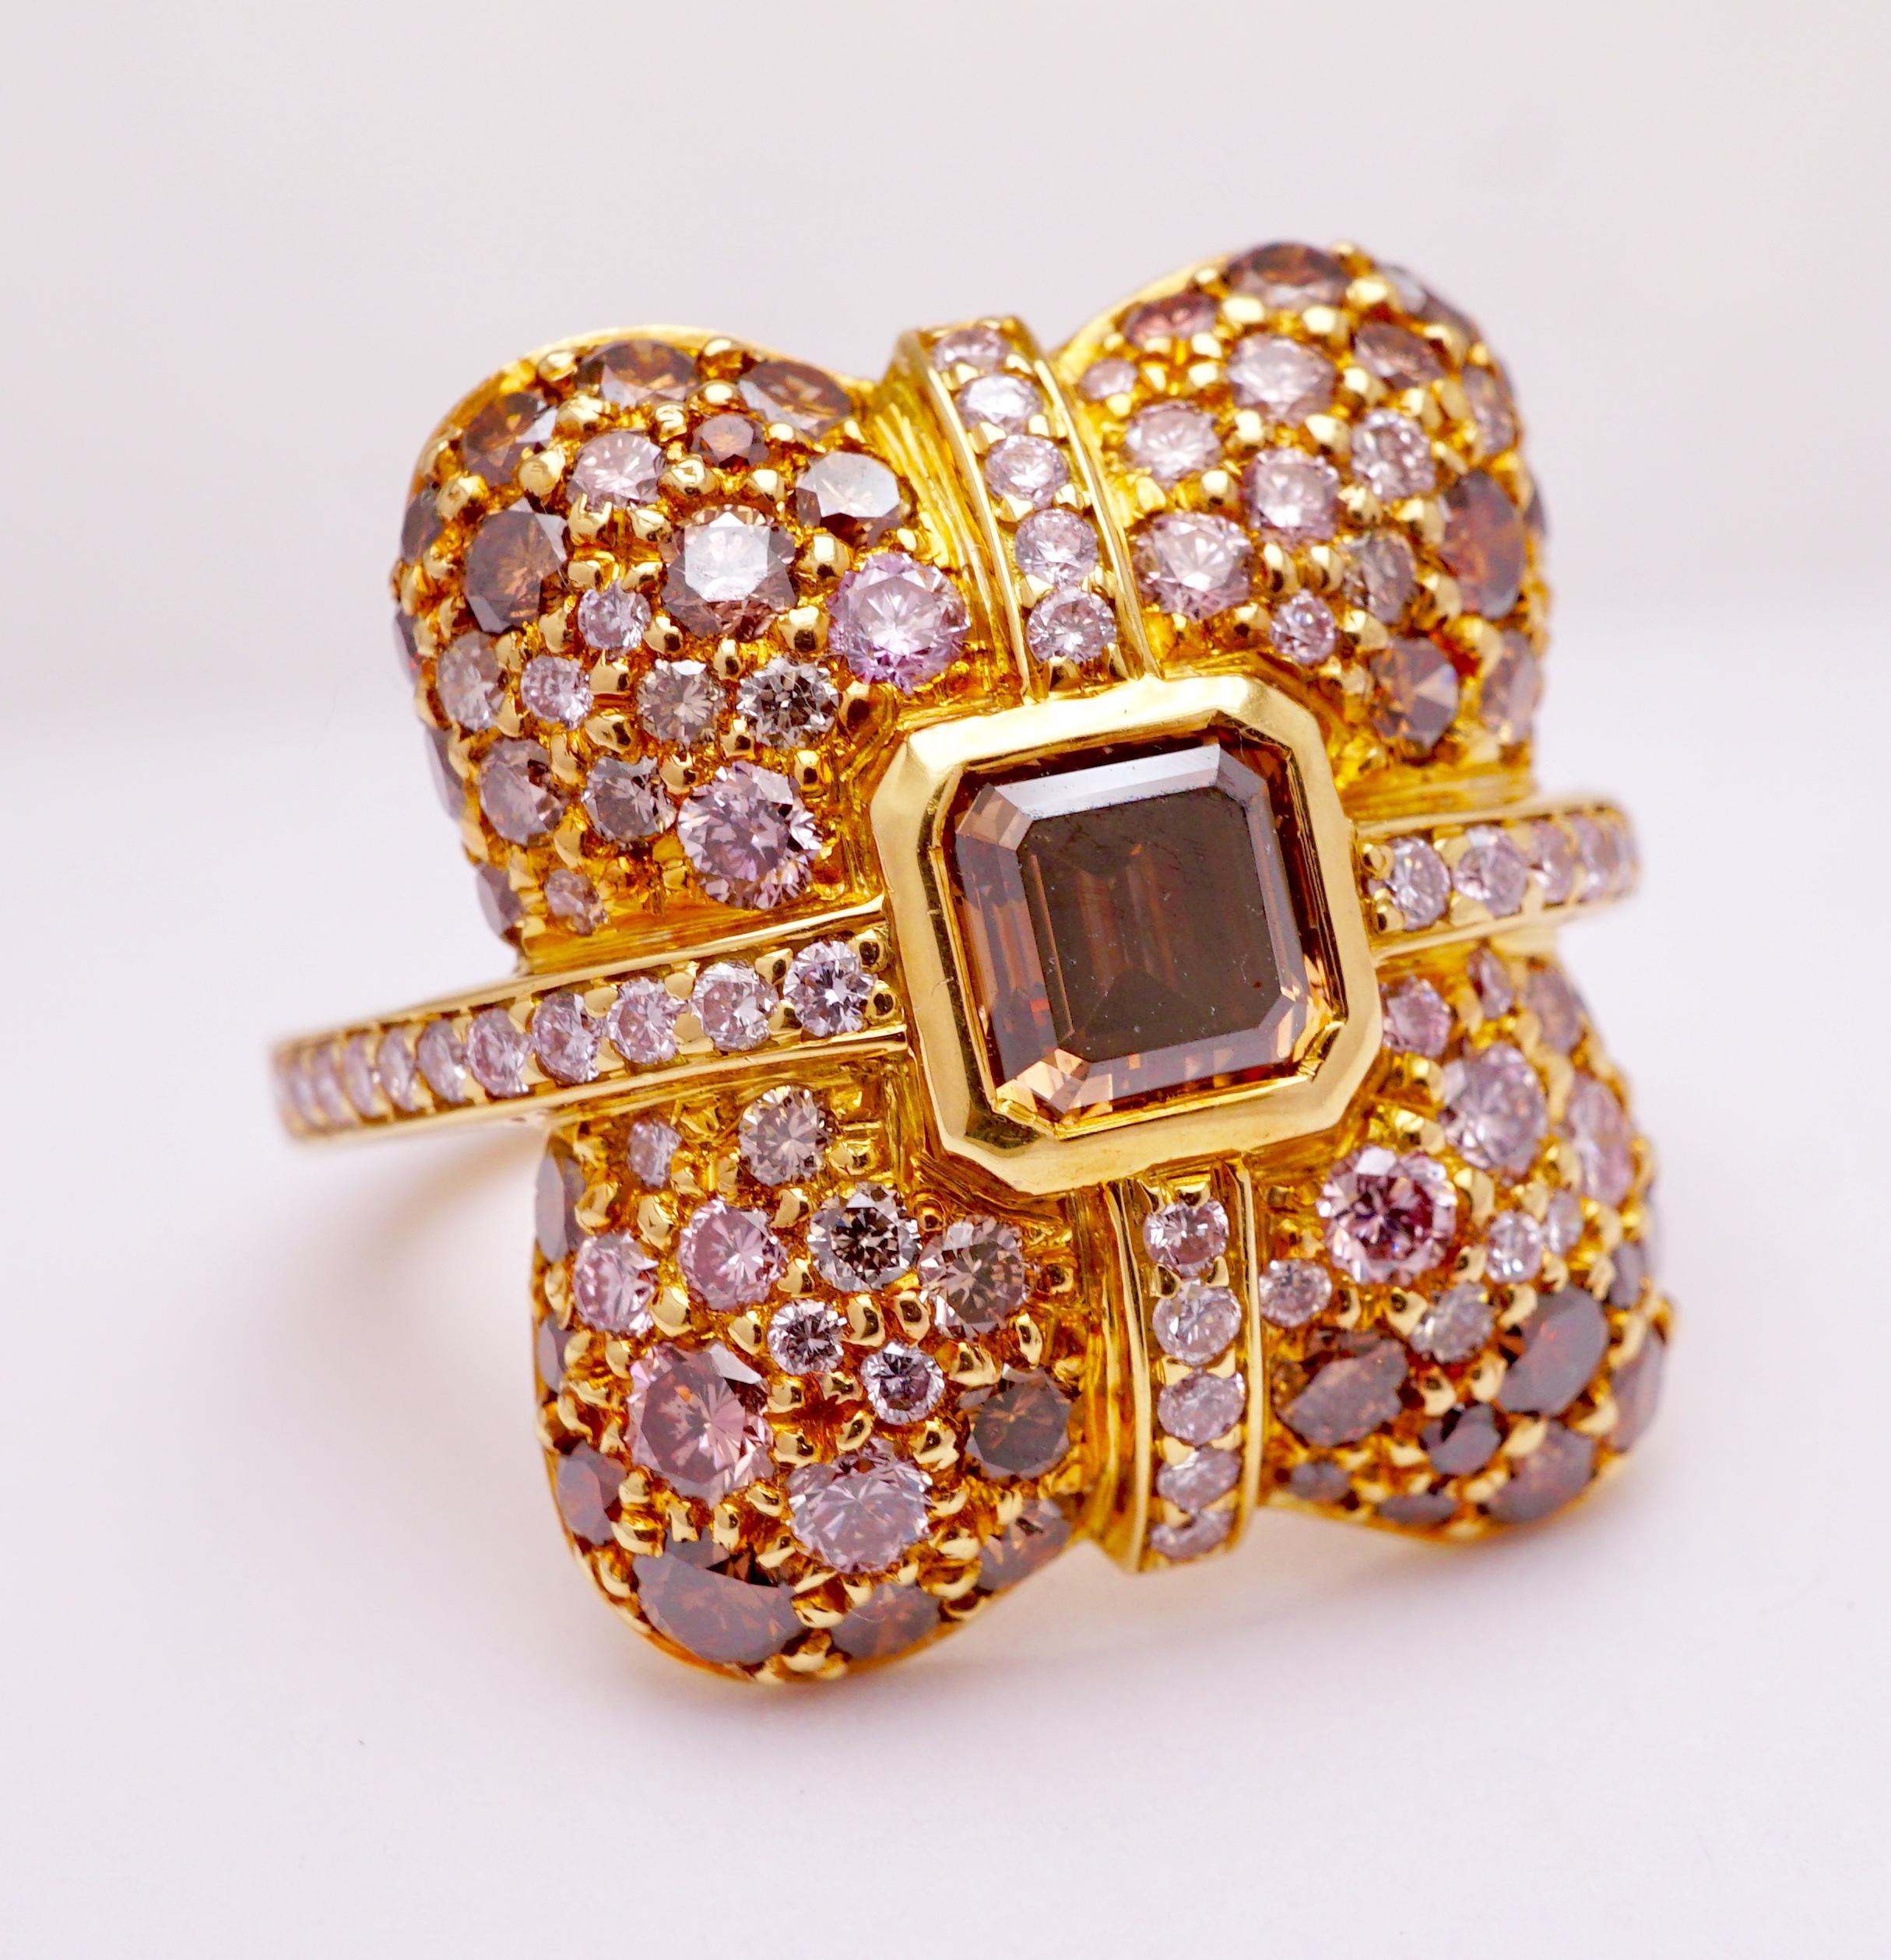 Diamond Ring with cross band of Pink pave set Diamonds, center stone is .90ct Asscher cut Orange-Brown VS2 Emerald cut diamond and graduating Pink, Brown, Orange, Yellow and White Fancy colored VVS-SI1 diamonds, total of 4.56cts. Set in 18K Yellow